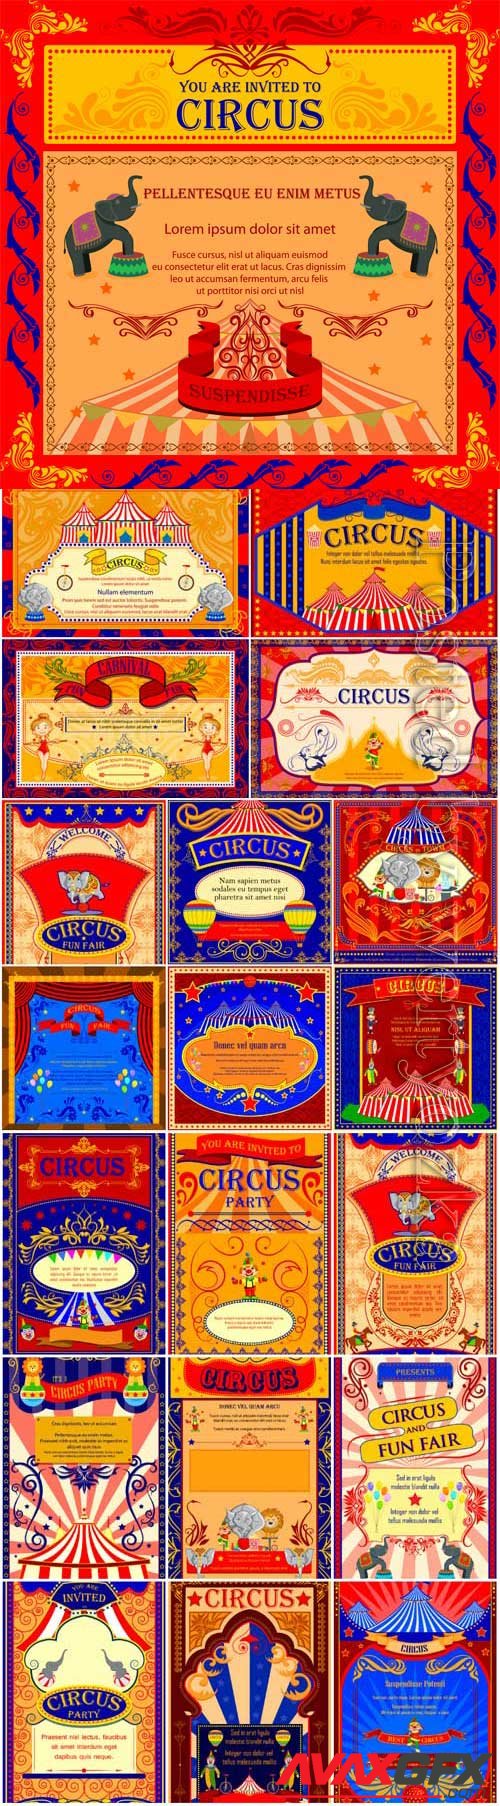 Circus advertising posters in vector